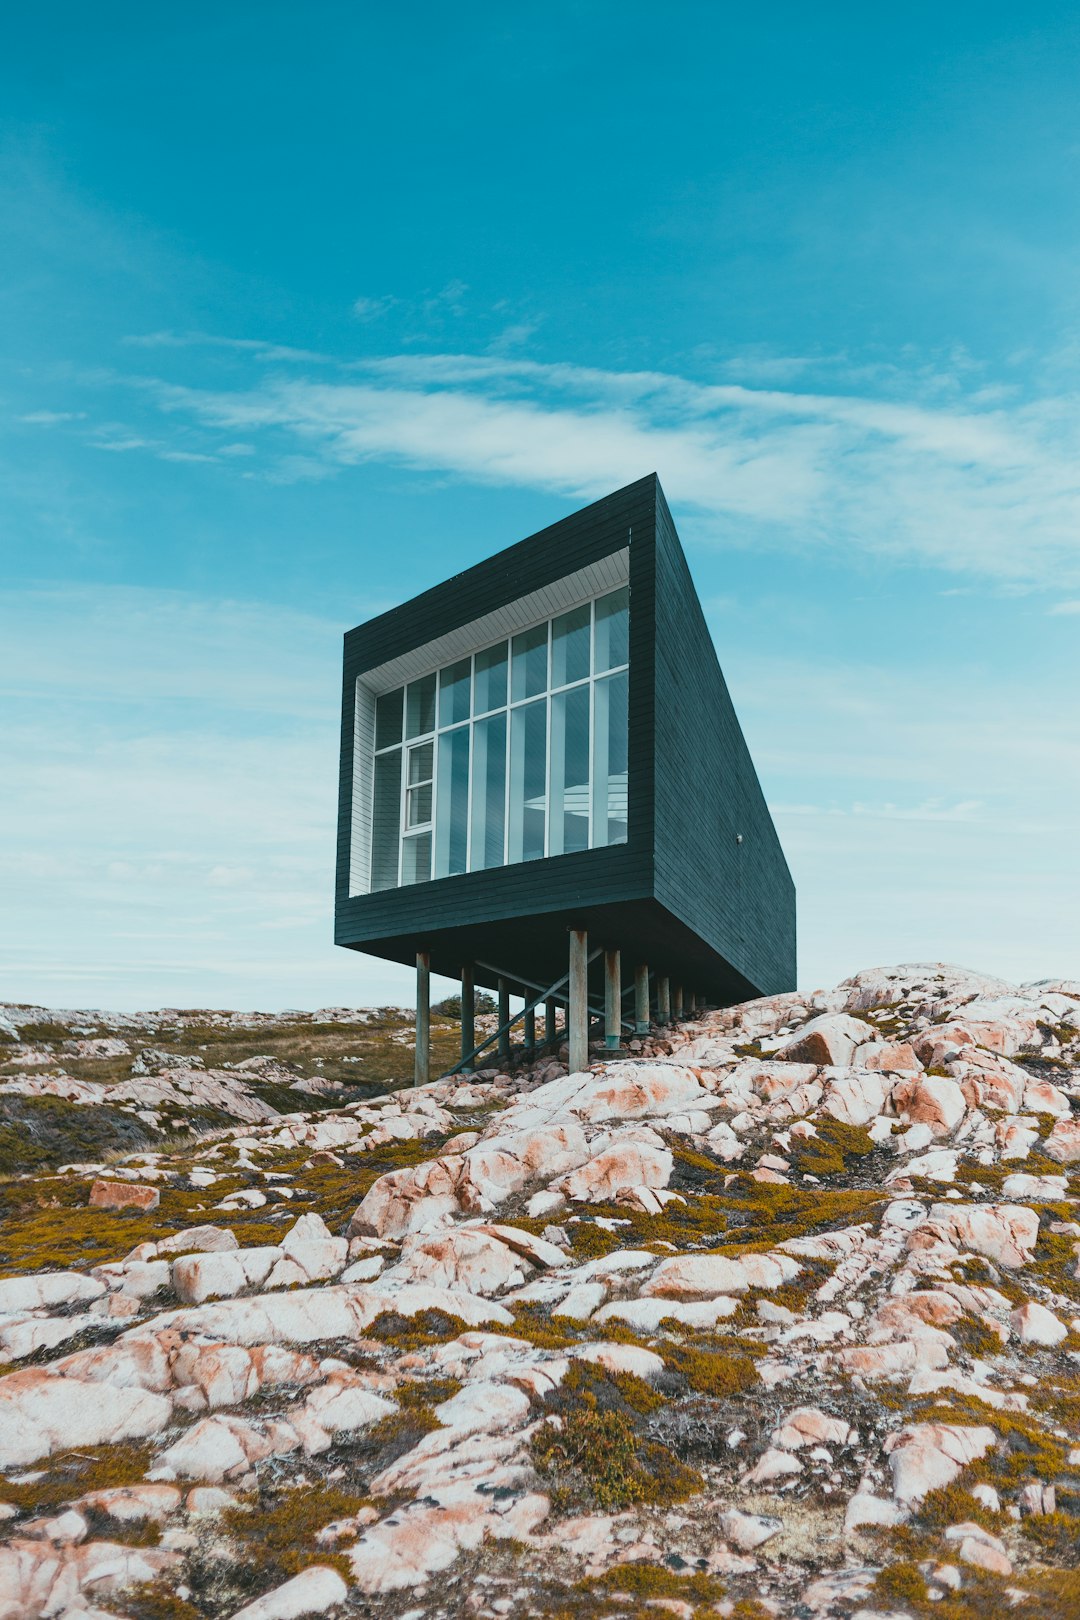 black and white wooden house on rocky ground under blue sky during daytime